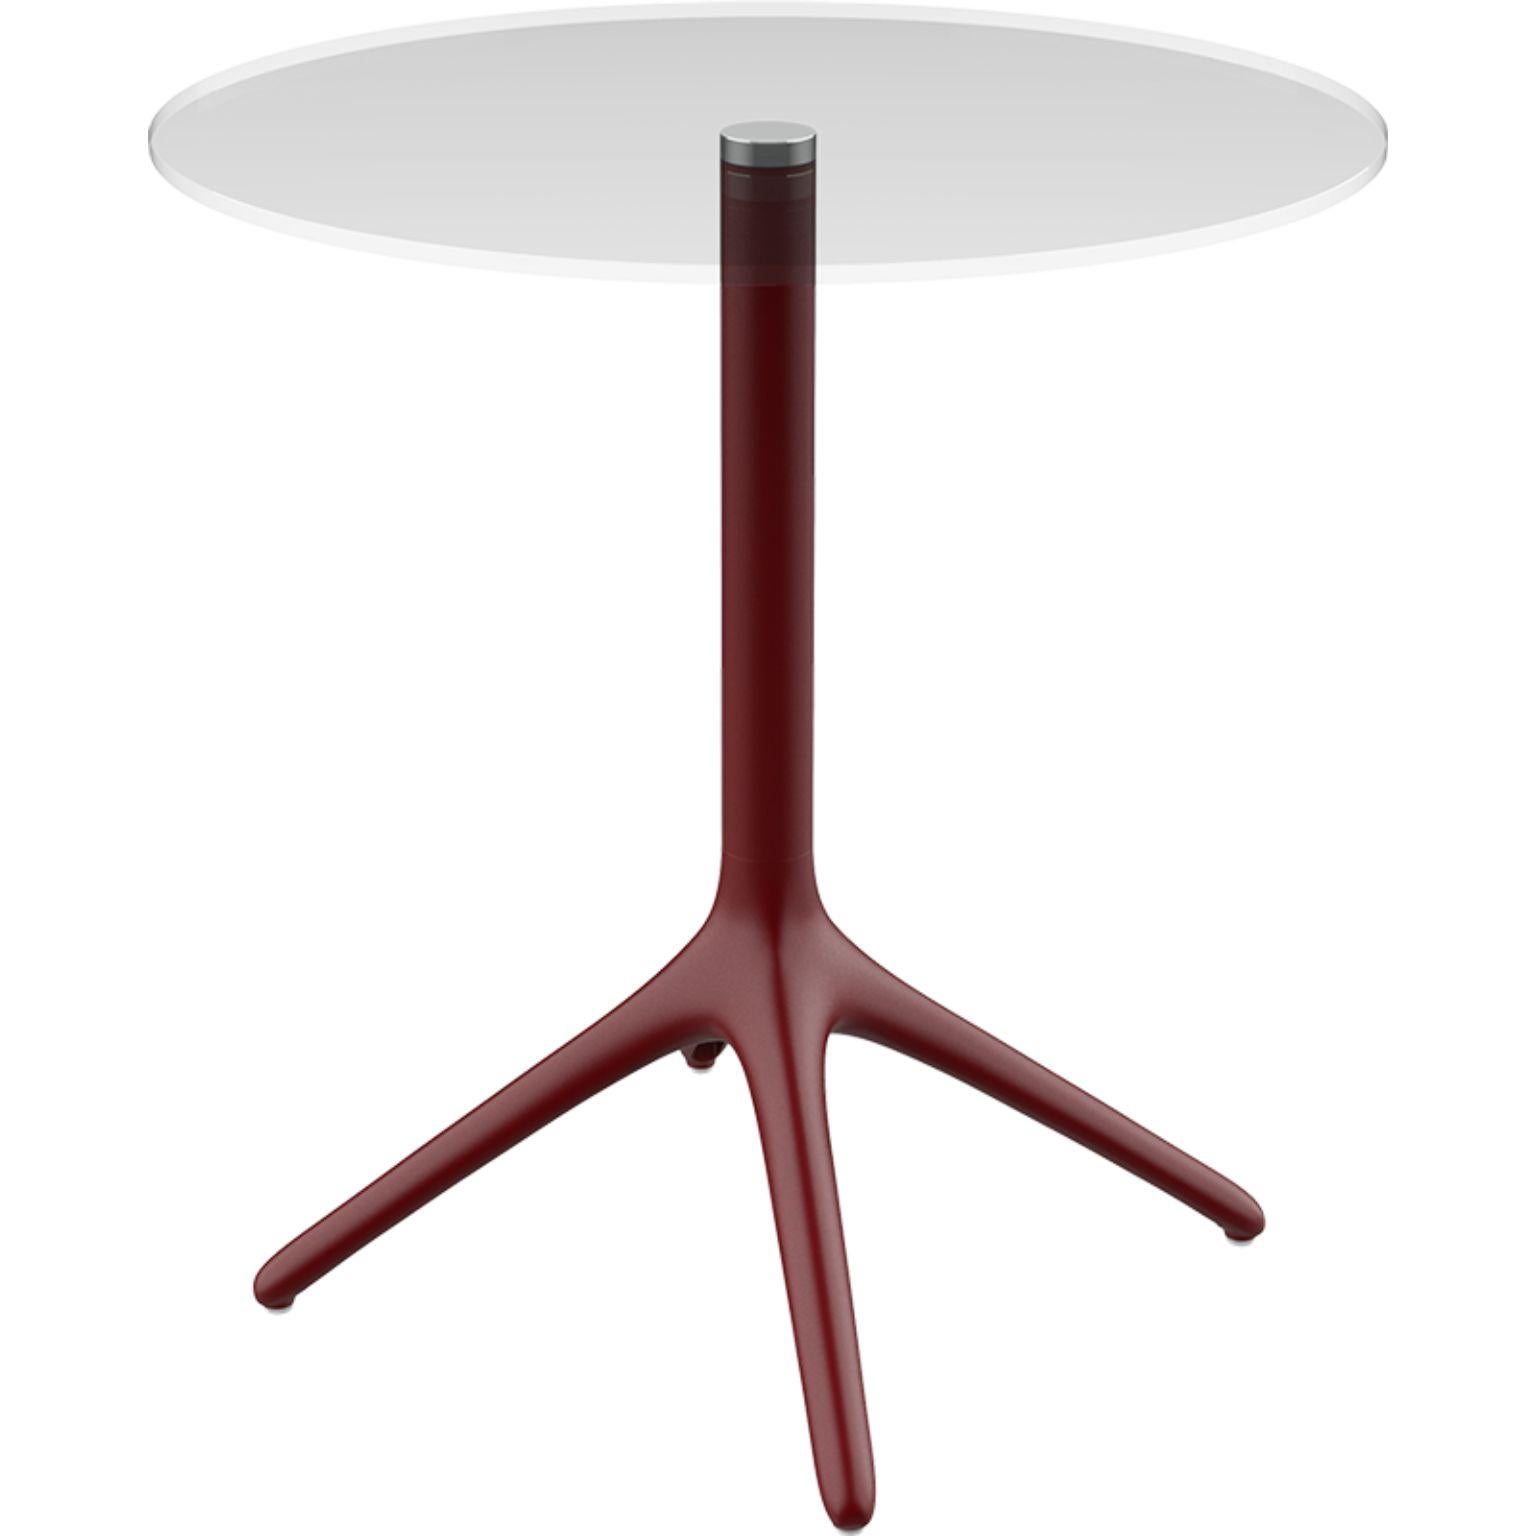 Spanish Uni White Table 73 by Mowee For Sale